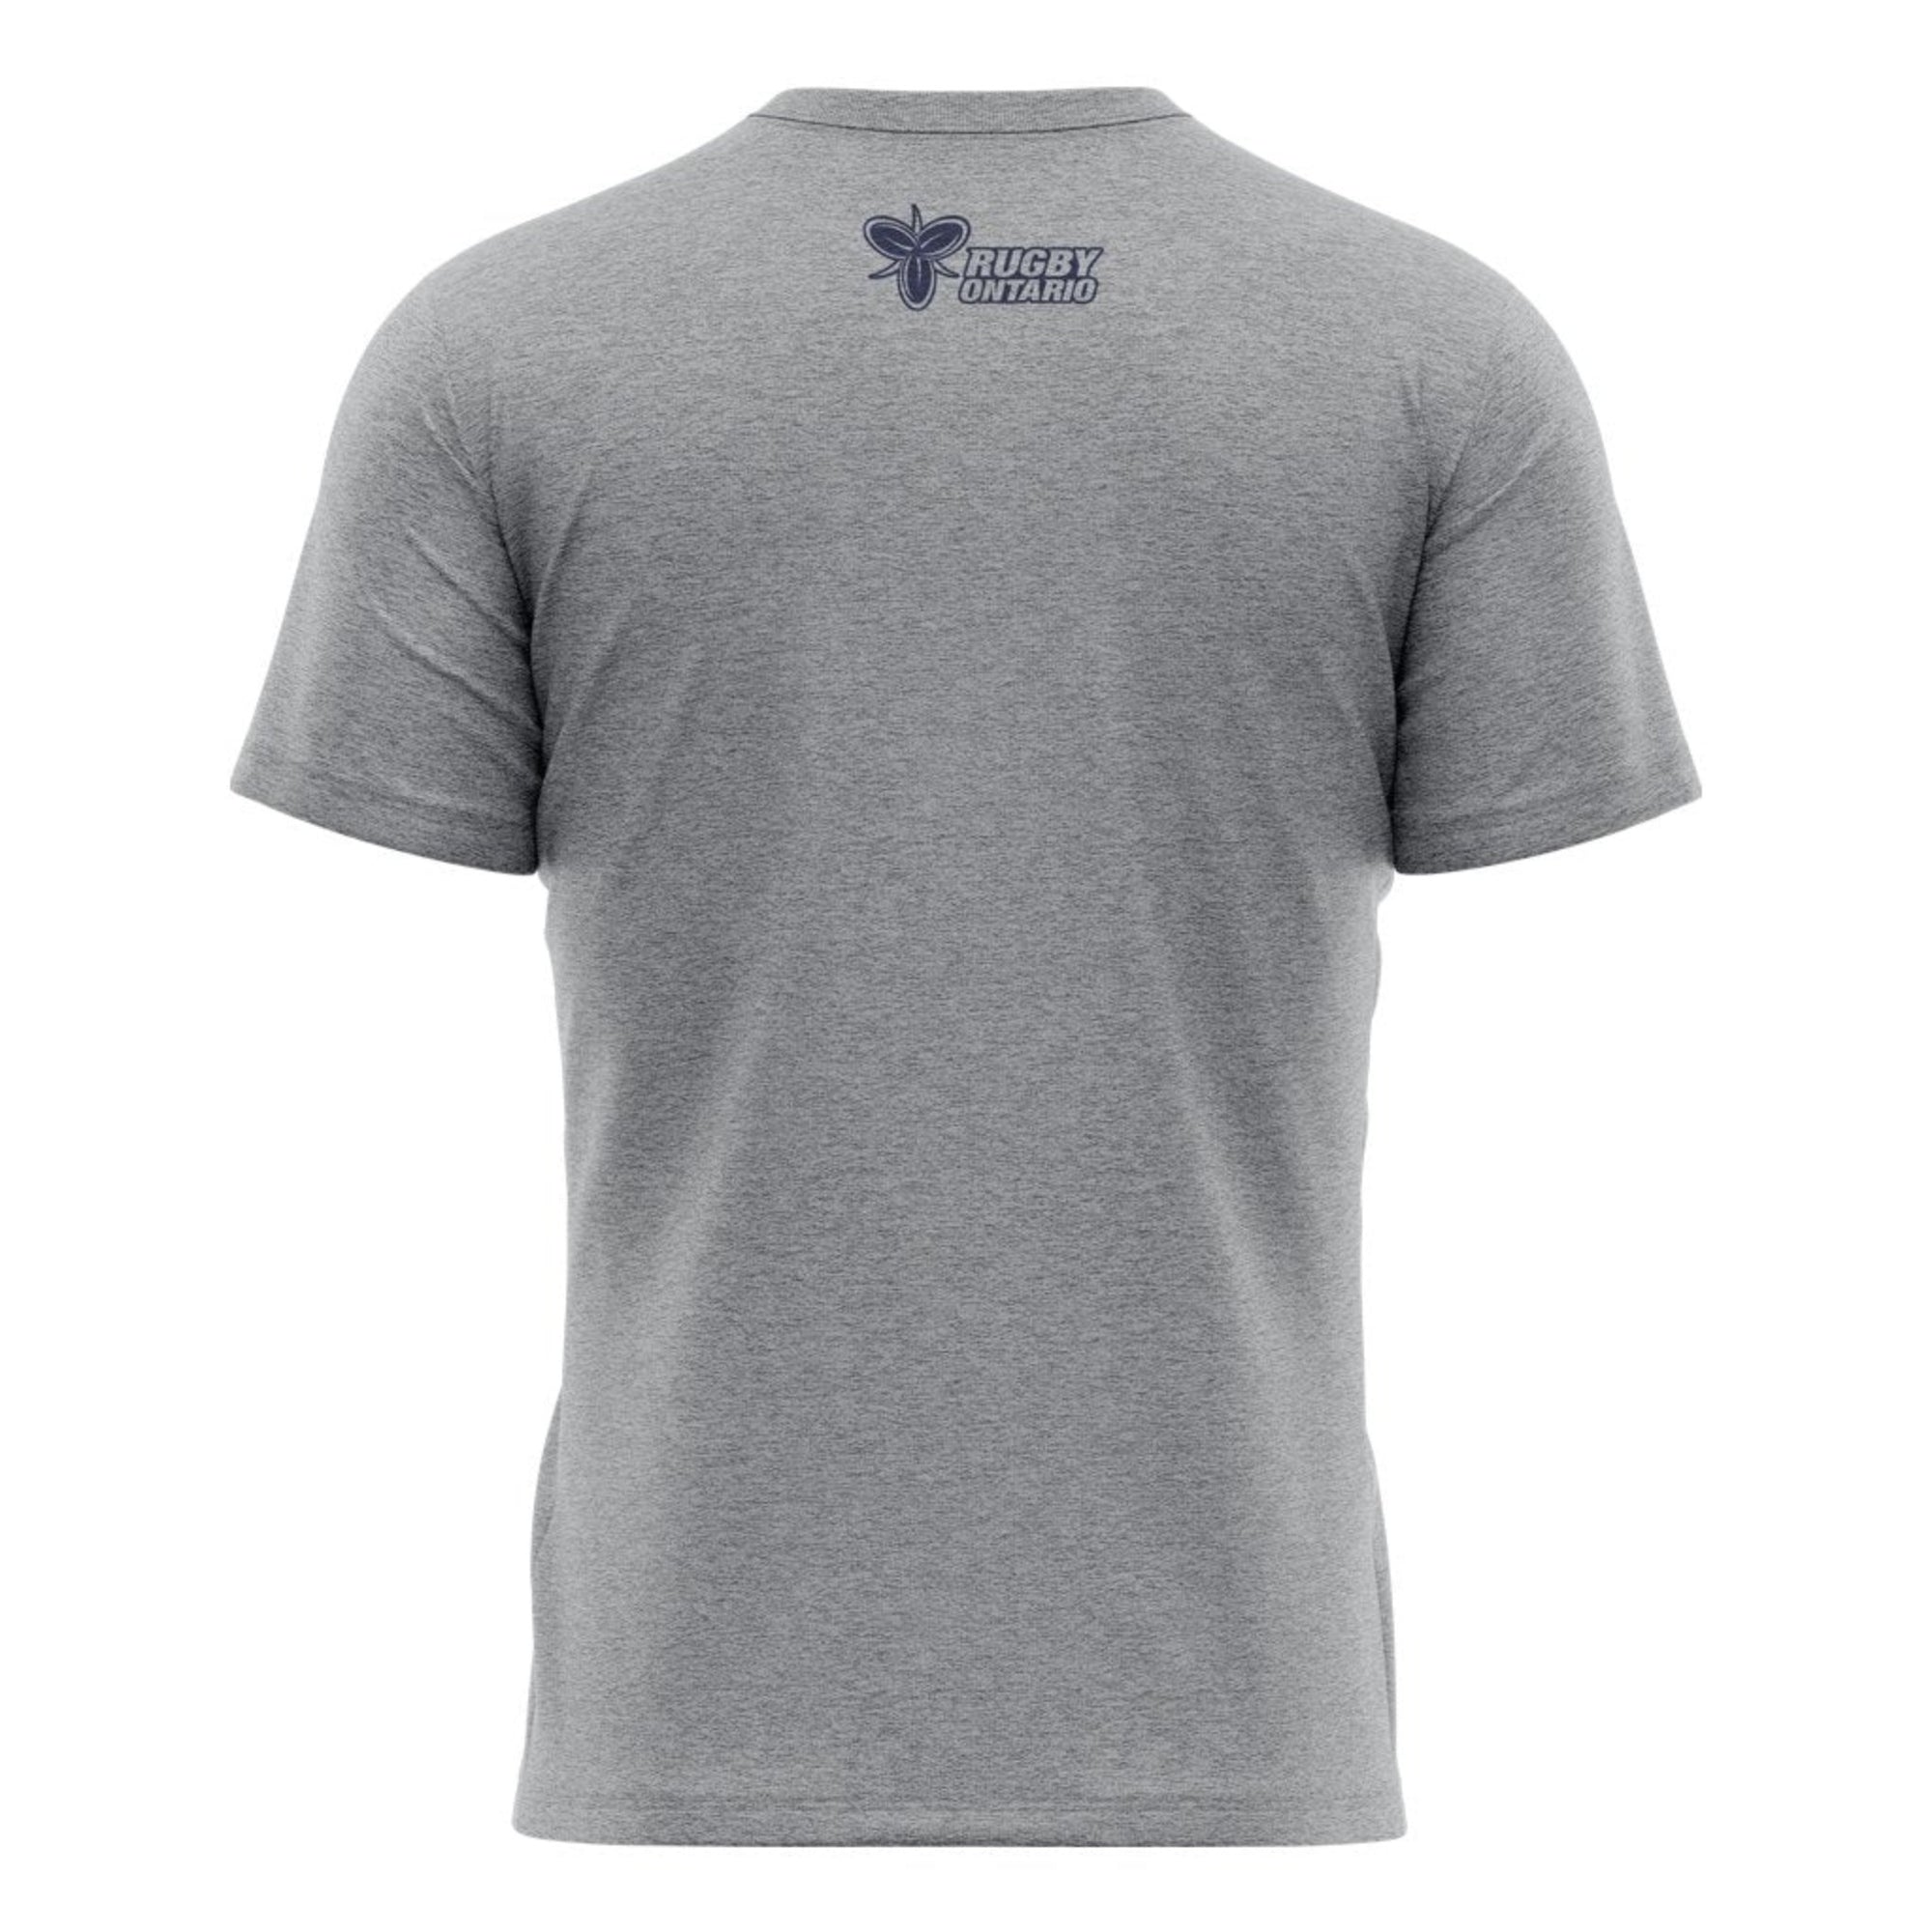 Rugby Ontario "Distress" Tee - Men's Sizing XS-4XL  - Athletic Grey